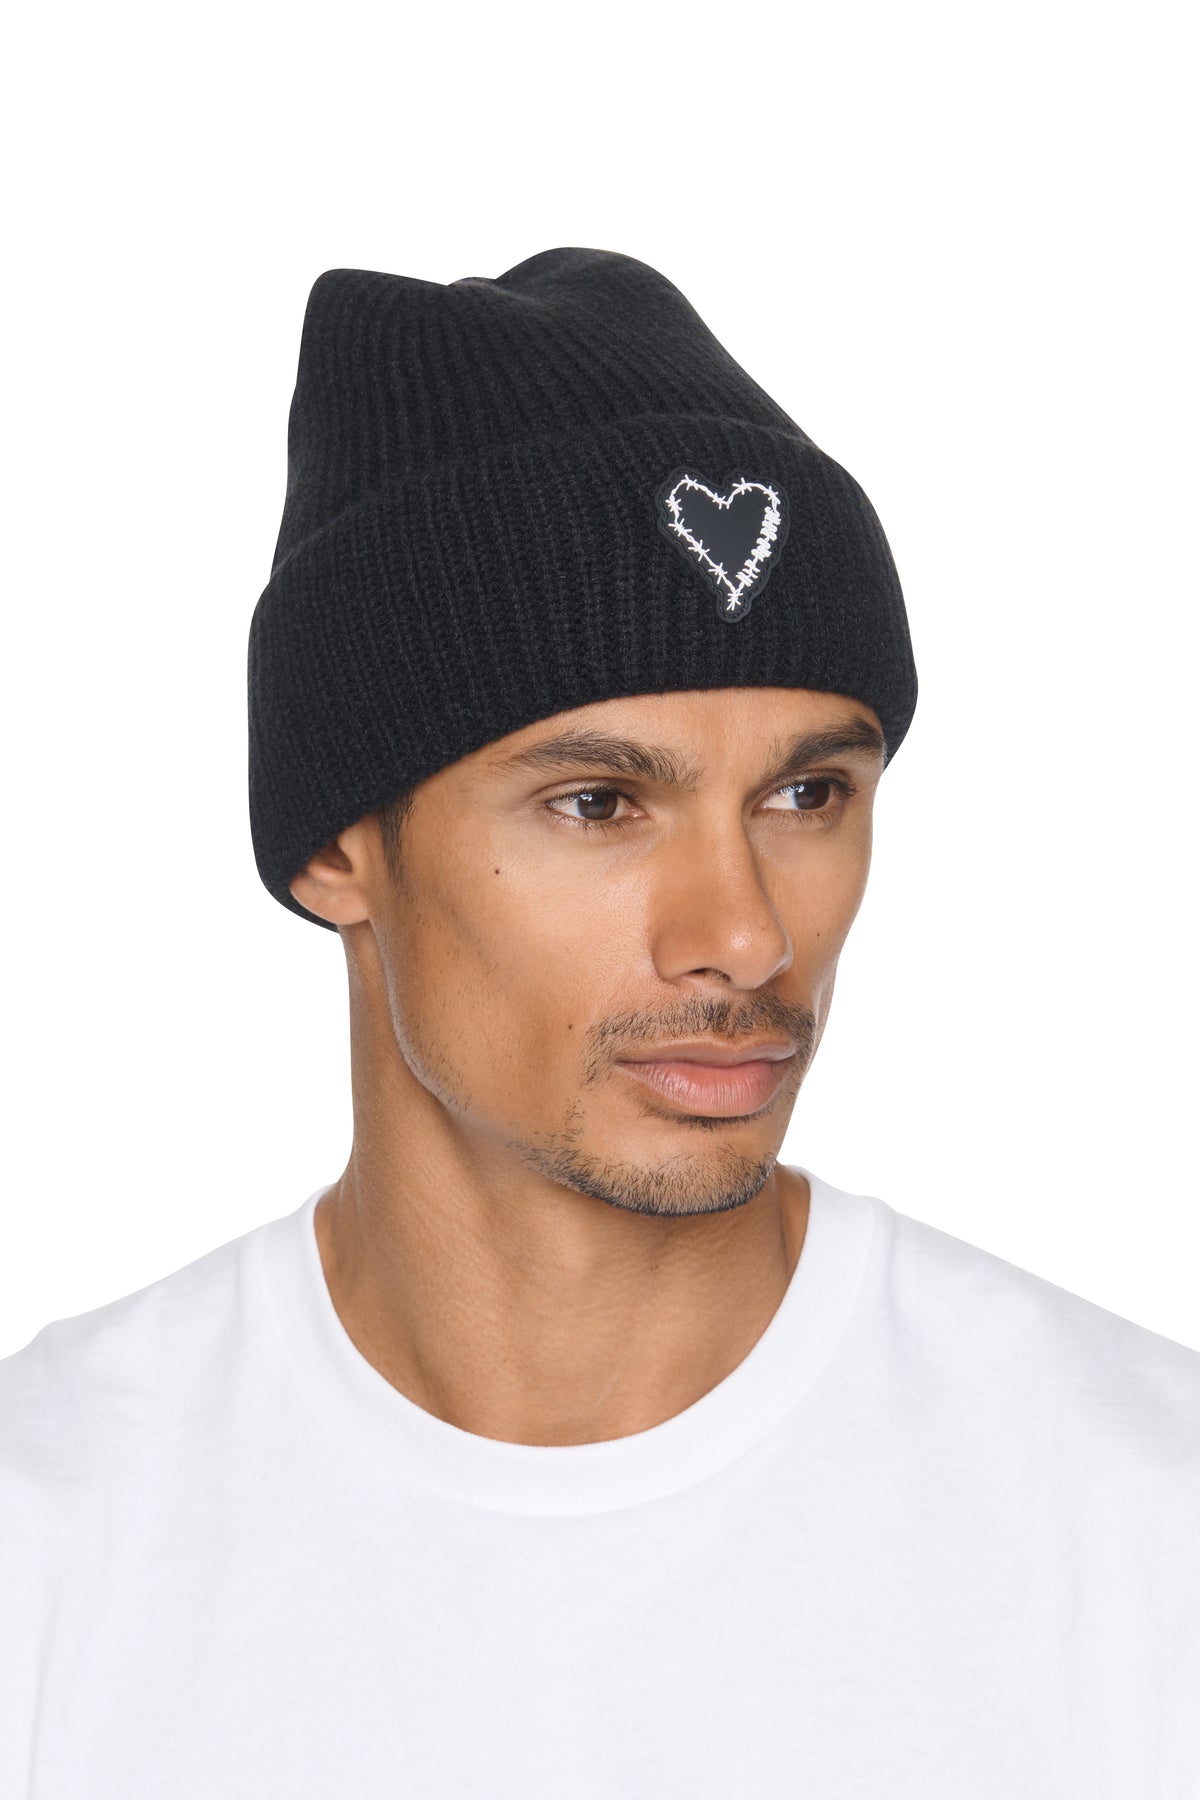 BARB HEART RIBBED SOFTEST EVER BEANIE